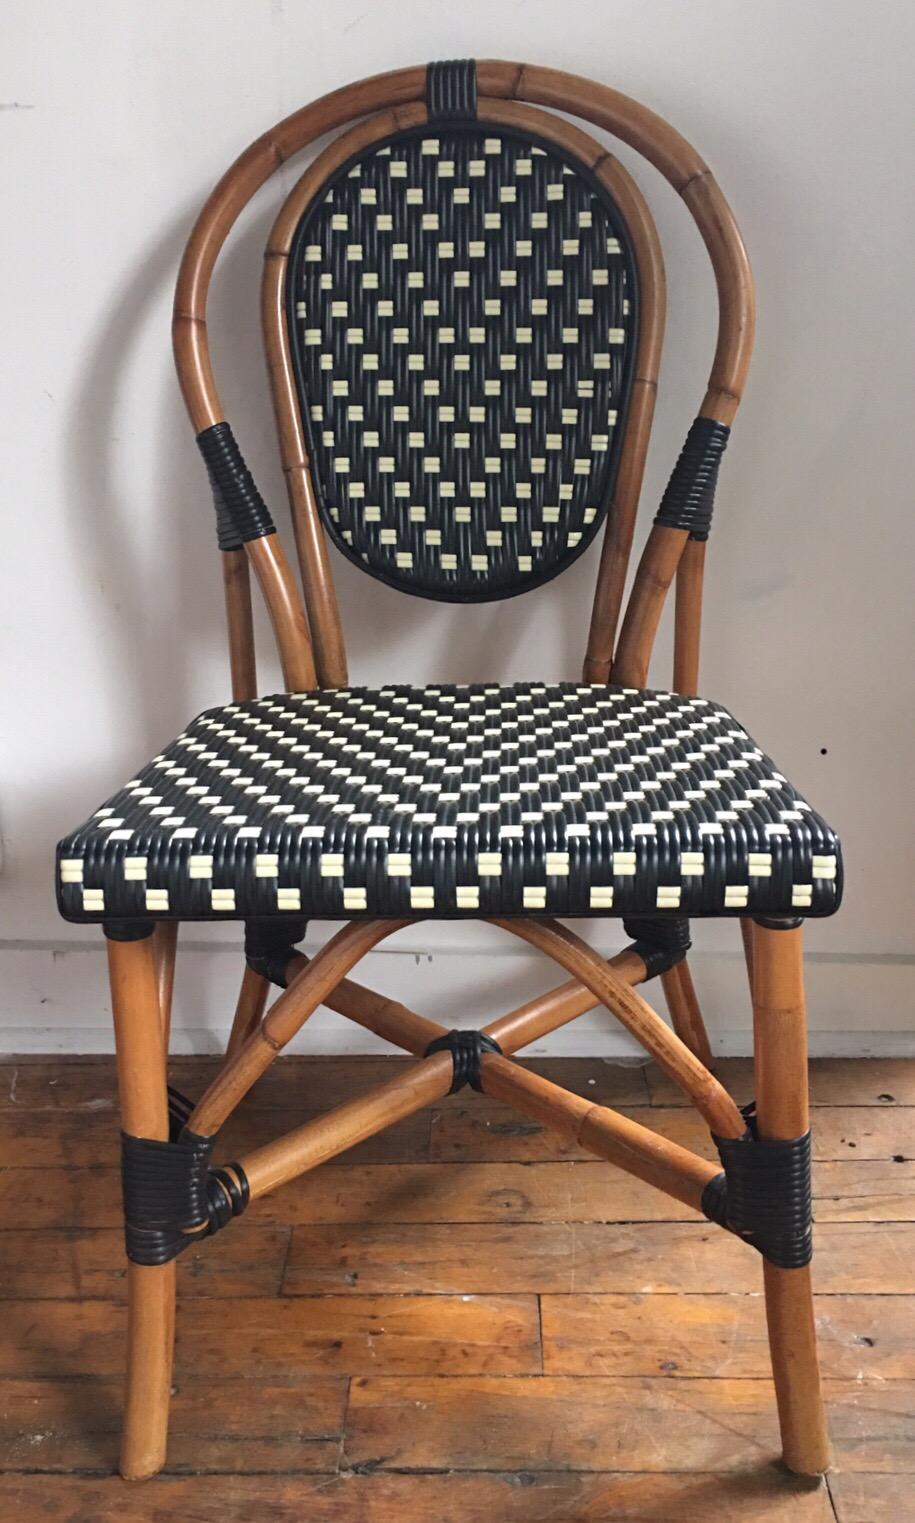 Classic French style bistro dining side chairs just like those you find in a Paris café. Frames expertly hand crafted of natural Malacca/Manau steamed bent cane with neutral black/ivory woven nylon seats and backs. For indoor and outdoor use under